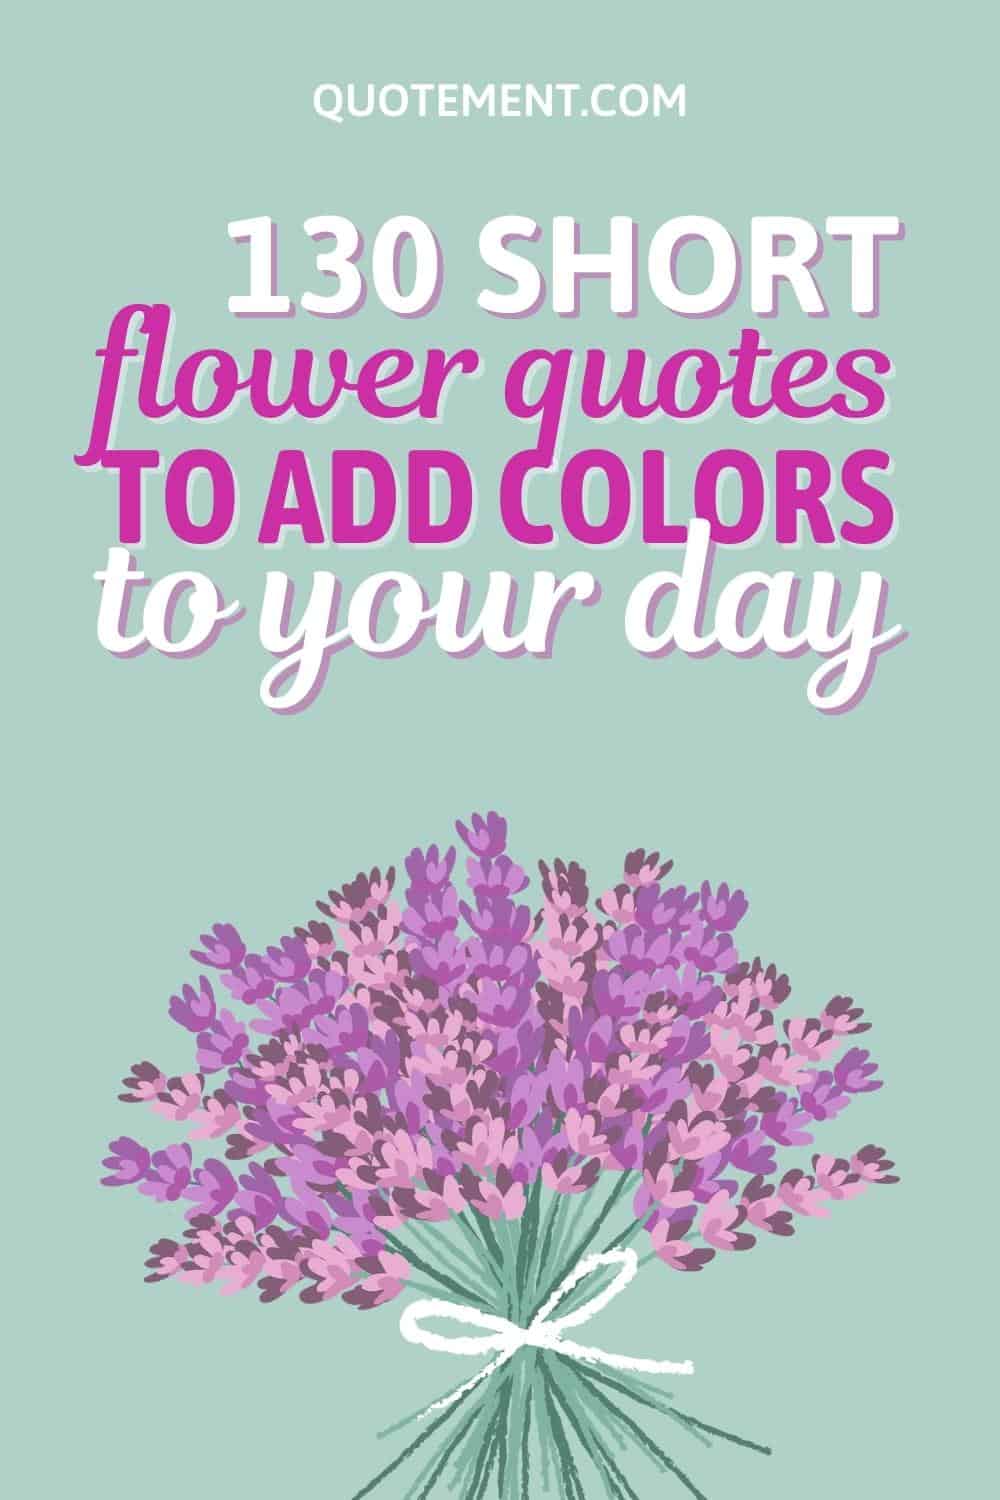 130 Beautiful Short Flower Quotes To Add Colors To Your Day
